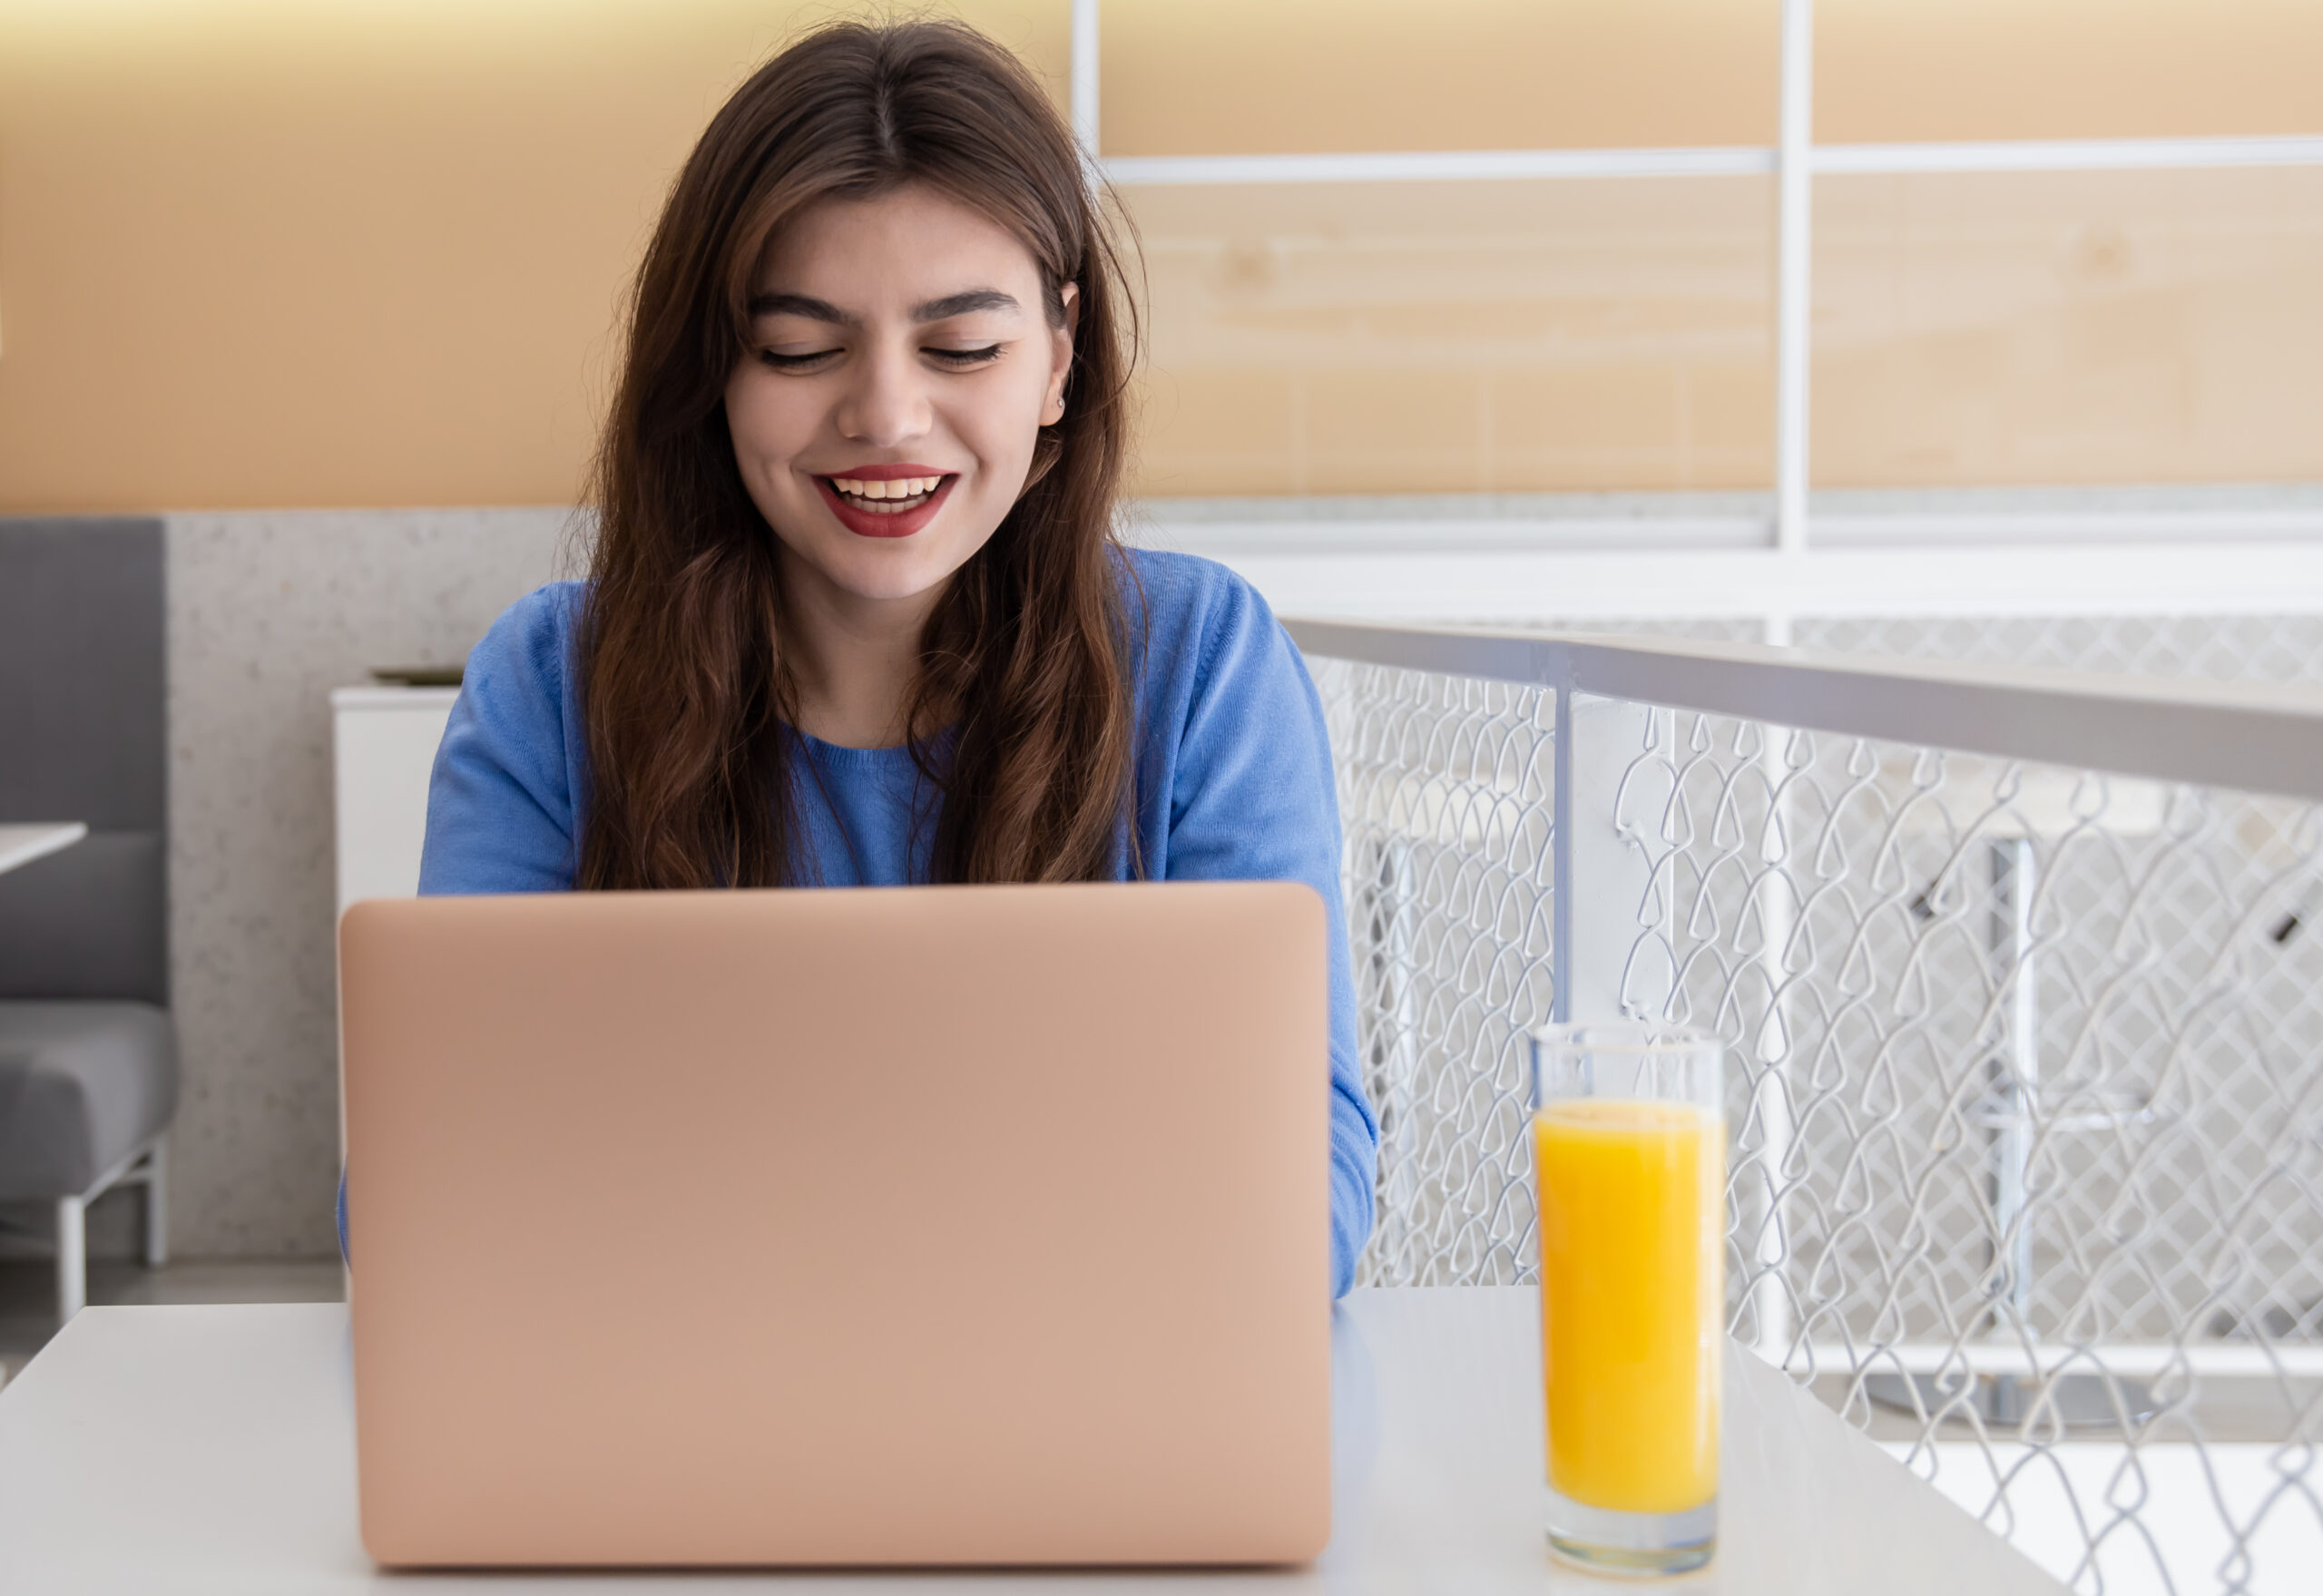 A young woman with an attractive smile, red lipstick, in a blue sweater works at a laptop, sitting in a cafe.